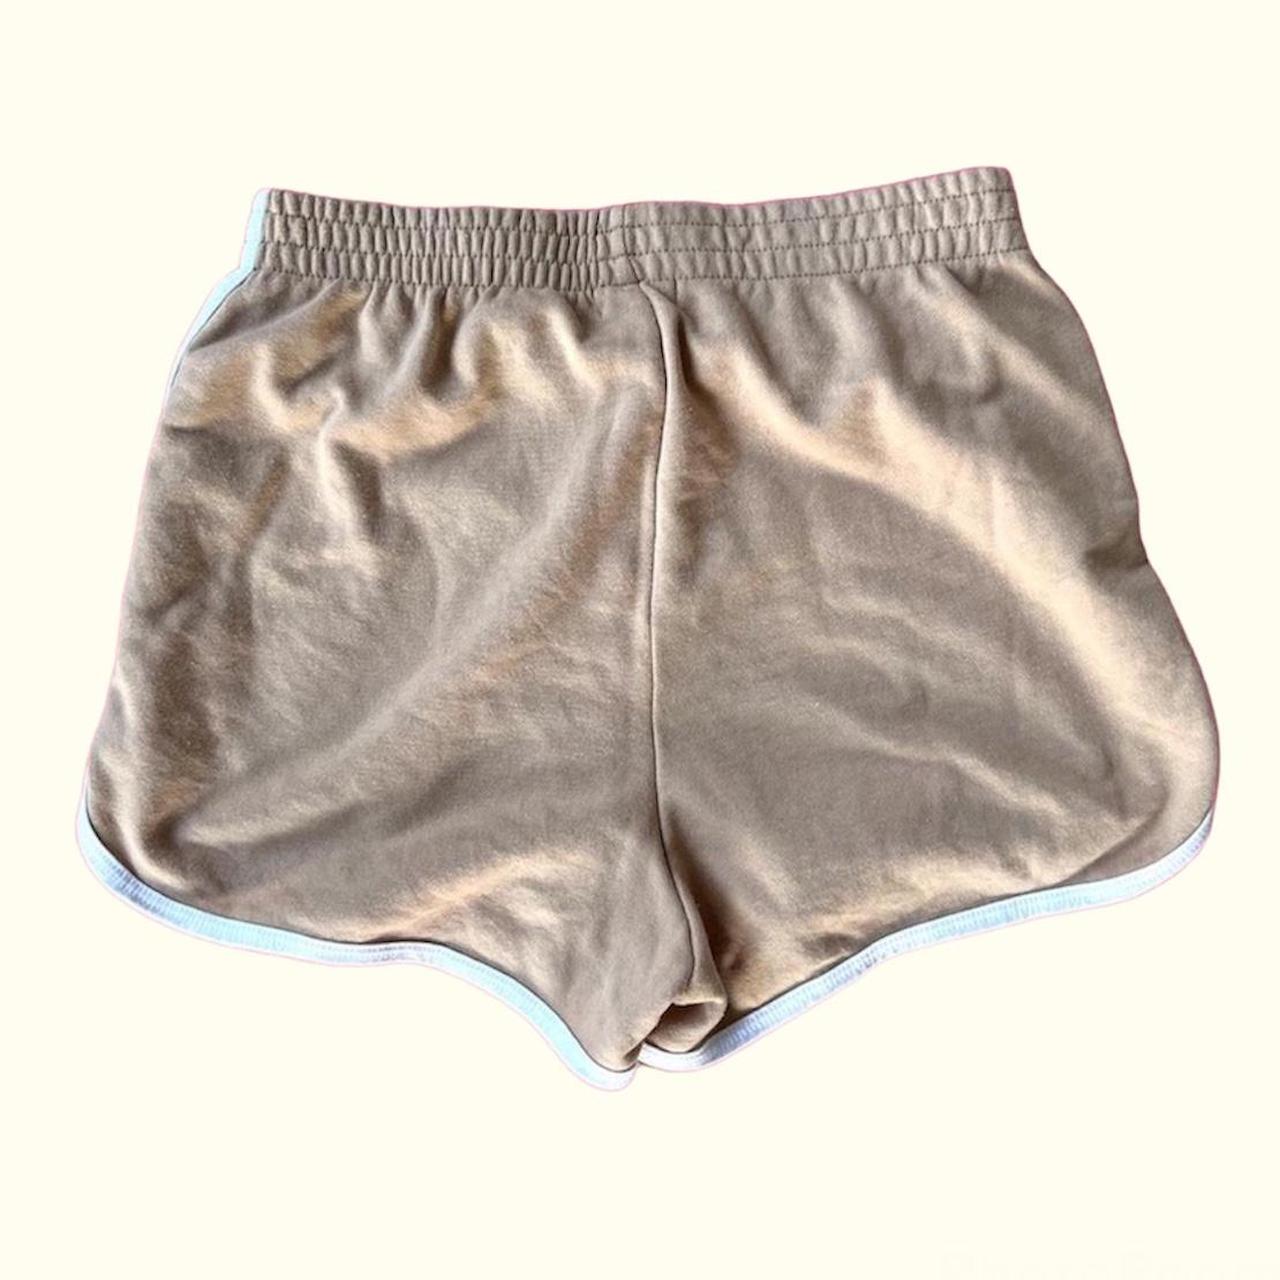 Product Image 2 - 🤎tillys tan new york shorts🤎
-size